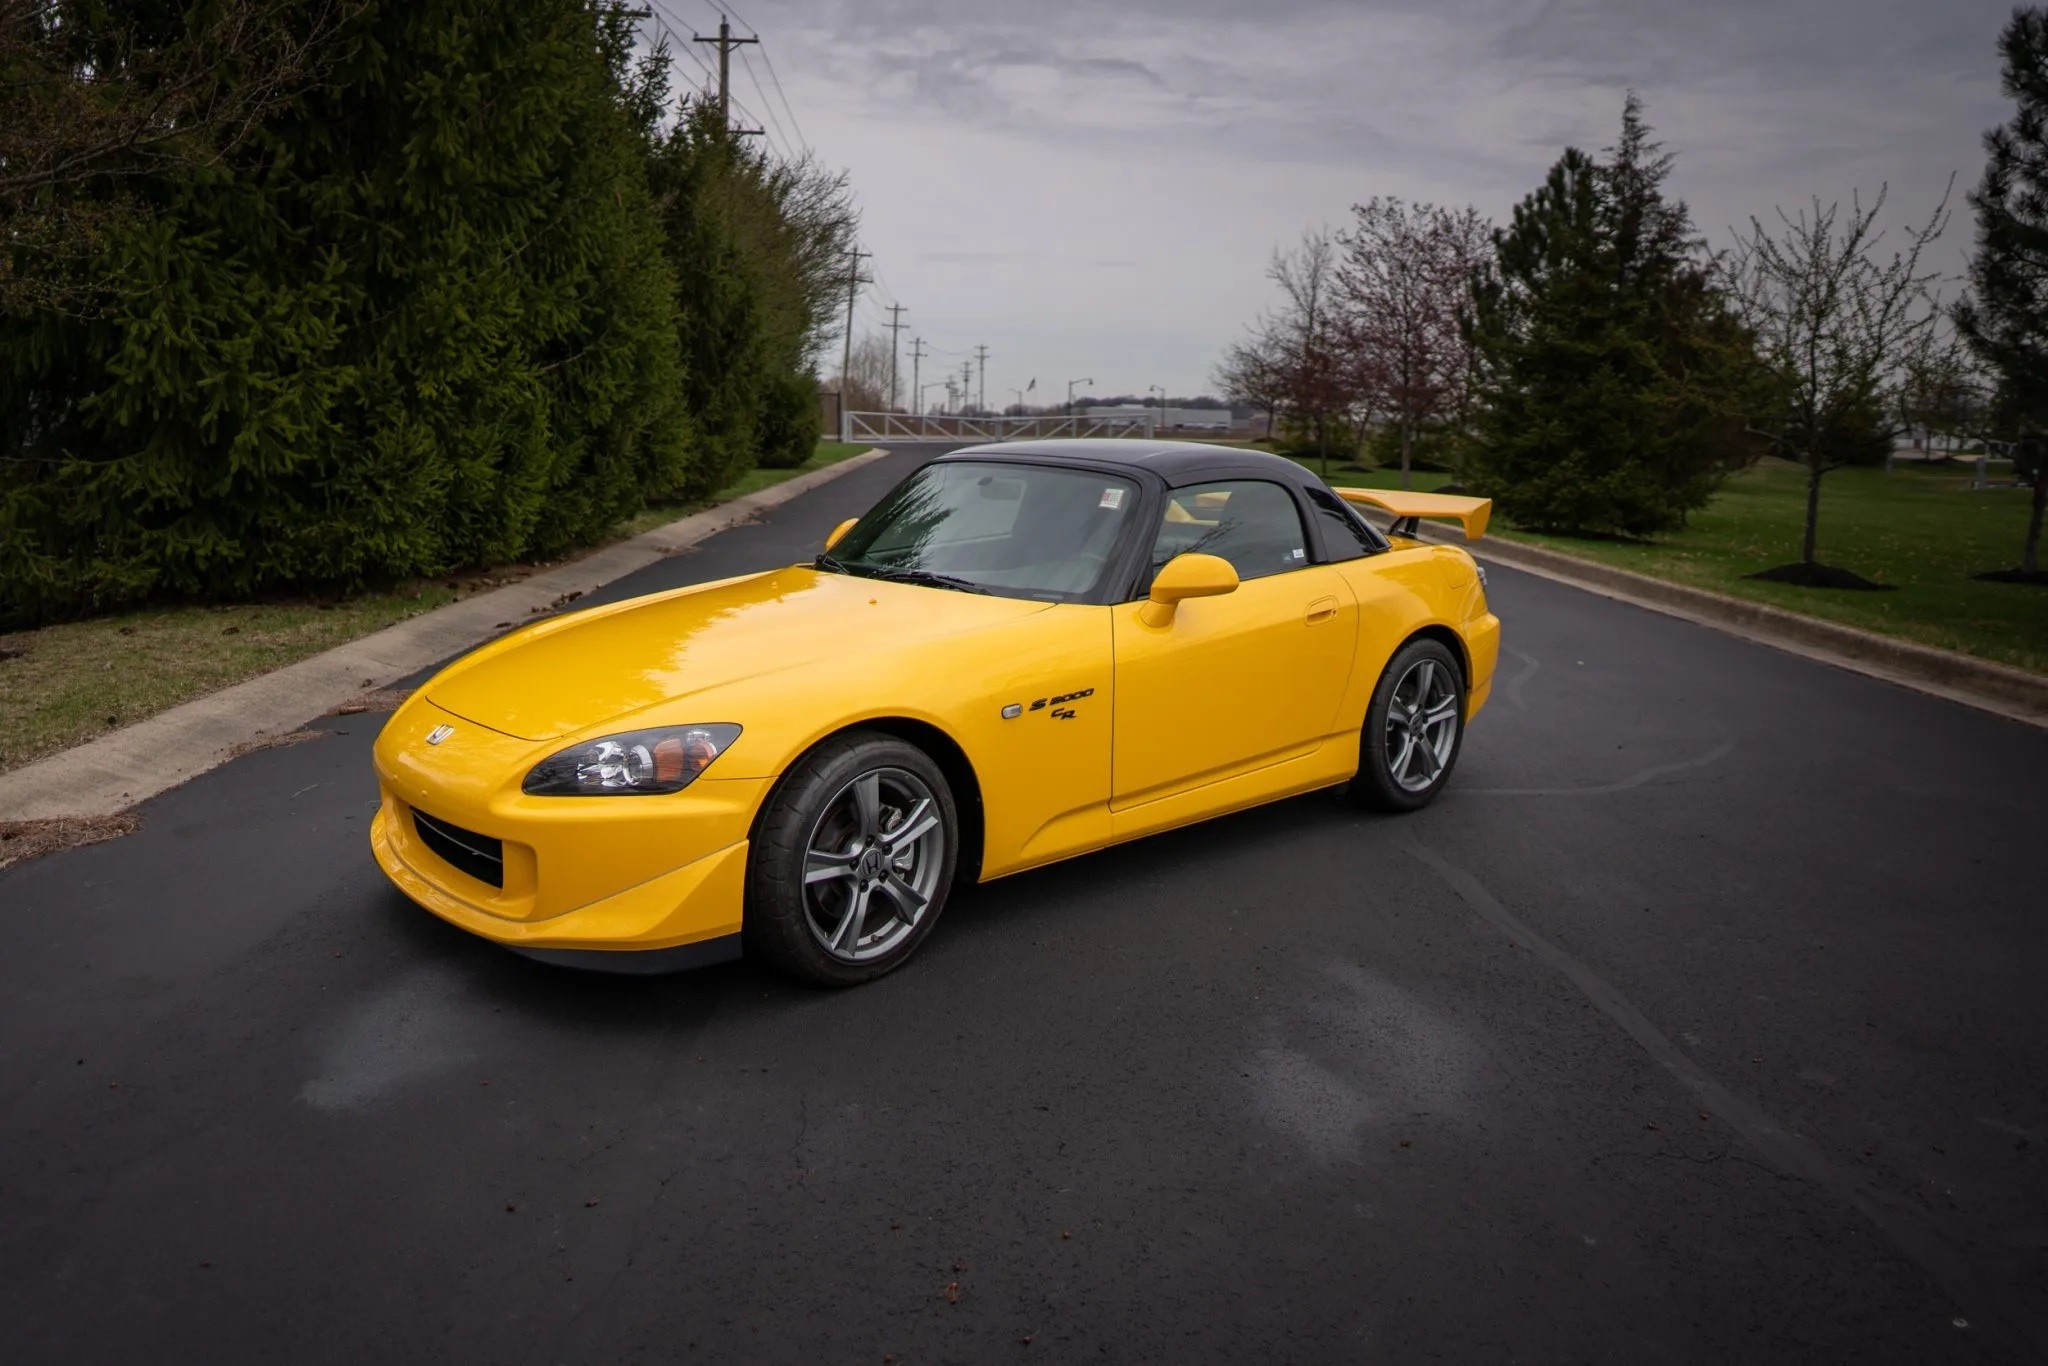 Holy Grail" 2009 Honda S2000 CR With 123 Mi on the Odo Sells for Record  Money - autoevolution